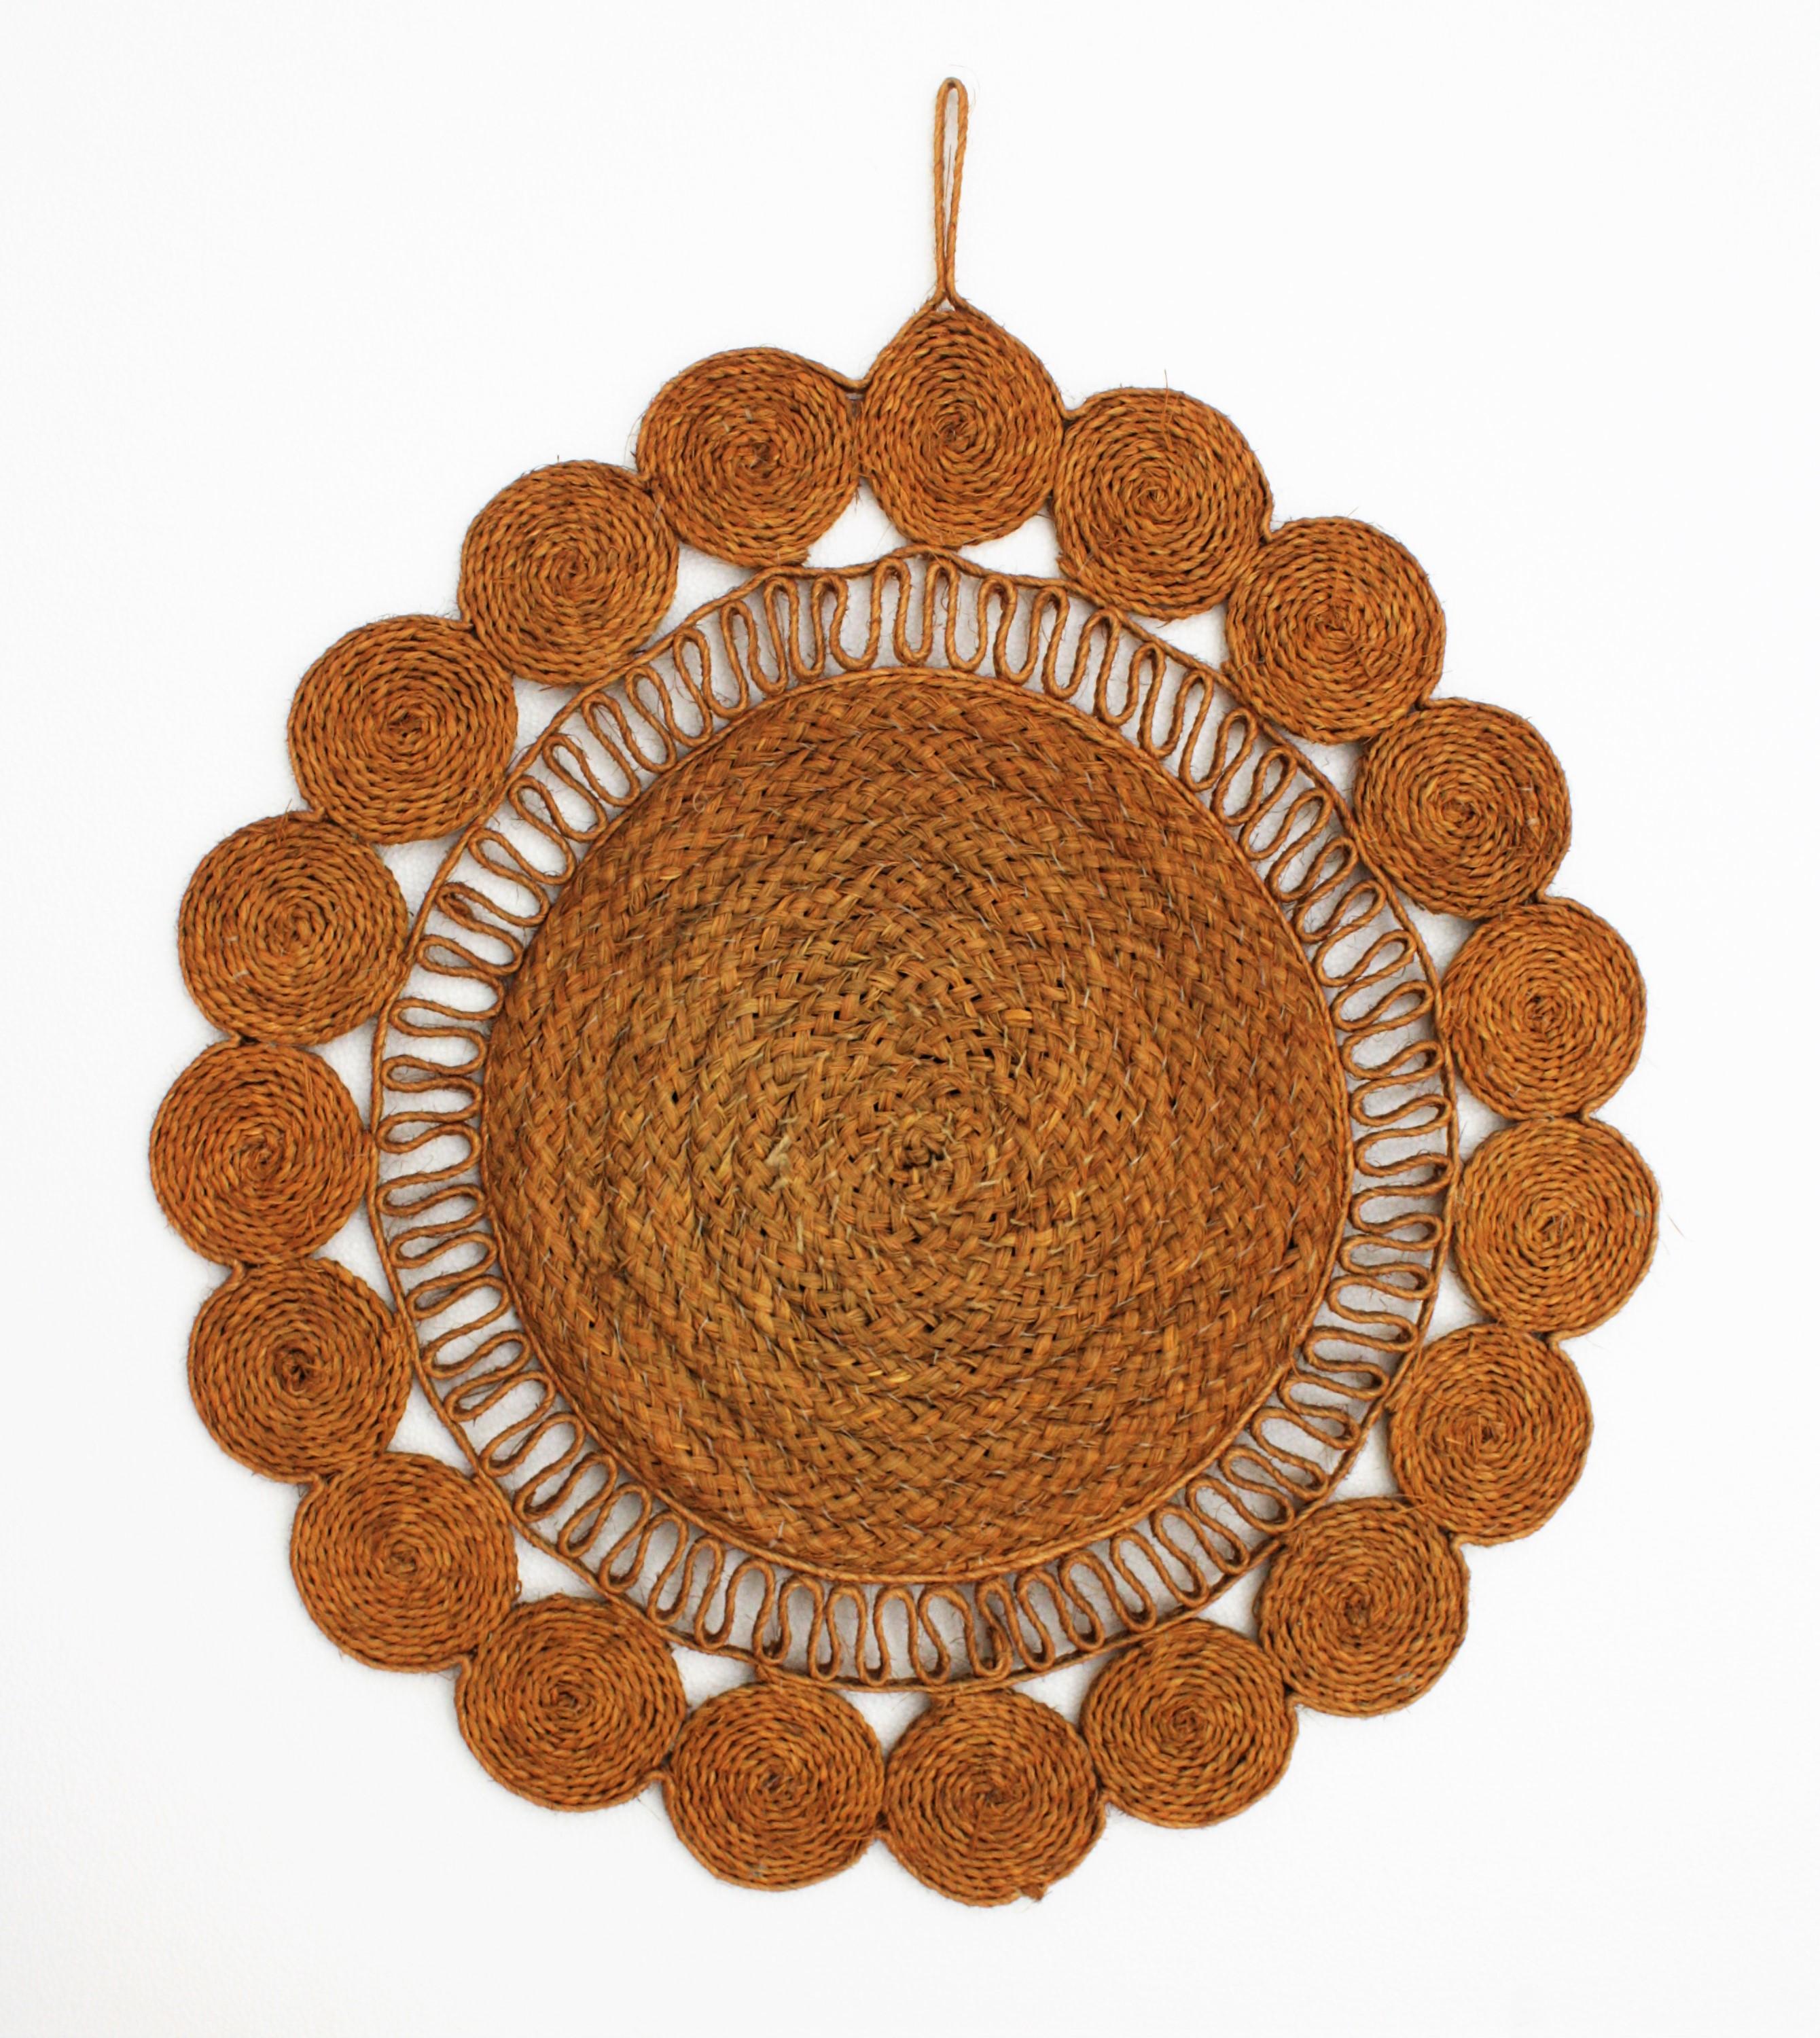 Woven Esparto Rope Wall Mirror, Spain, 1960s For Sale 4